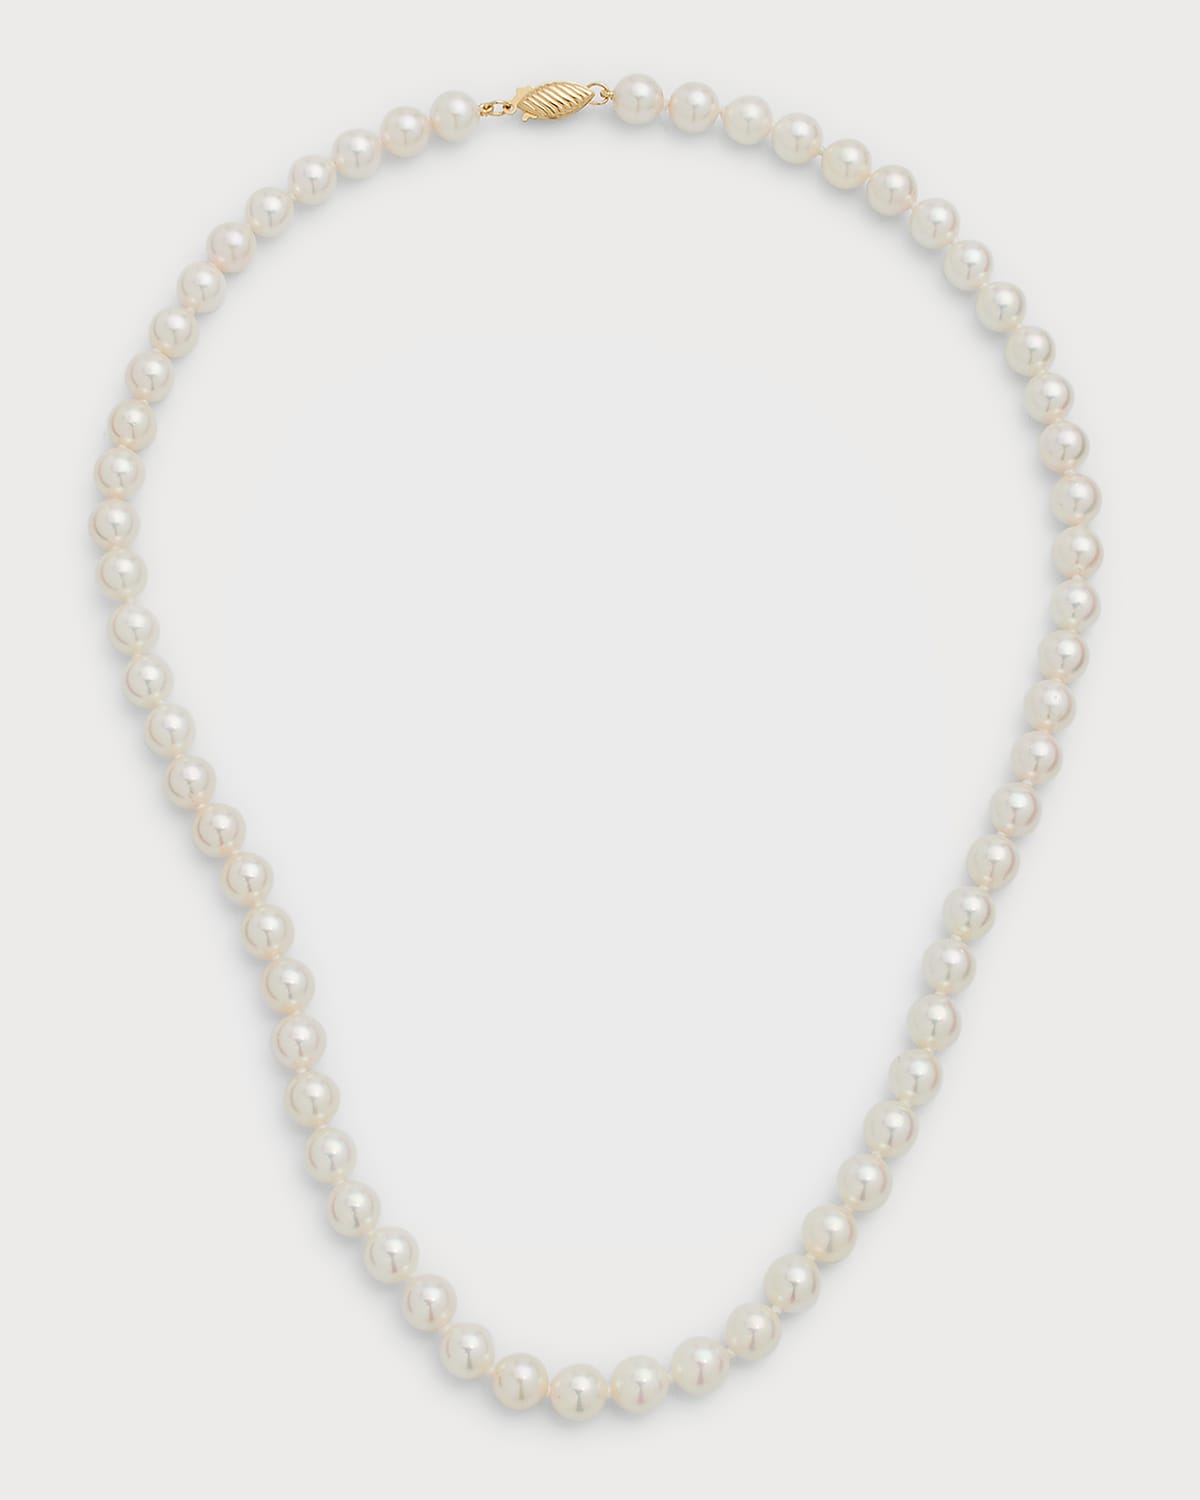 14k Yellow Gold Akoya Pearl Necklace, 18"